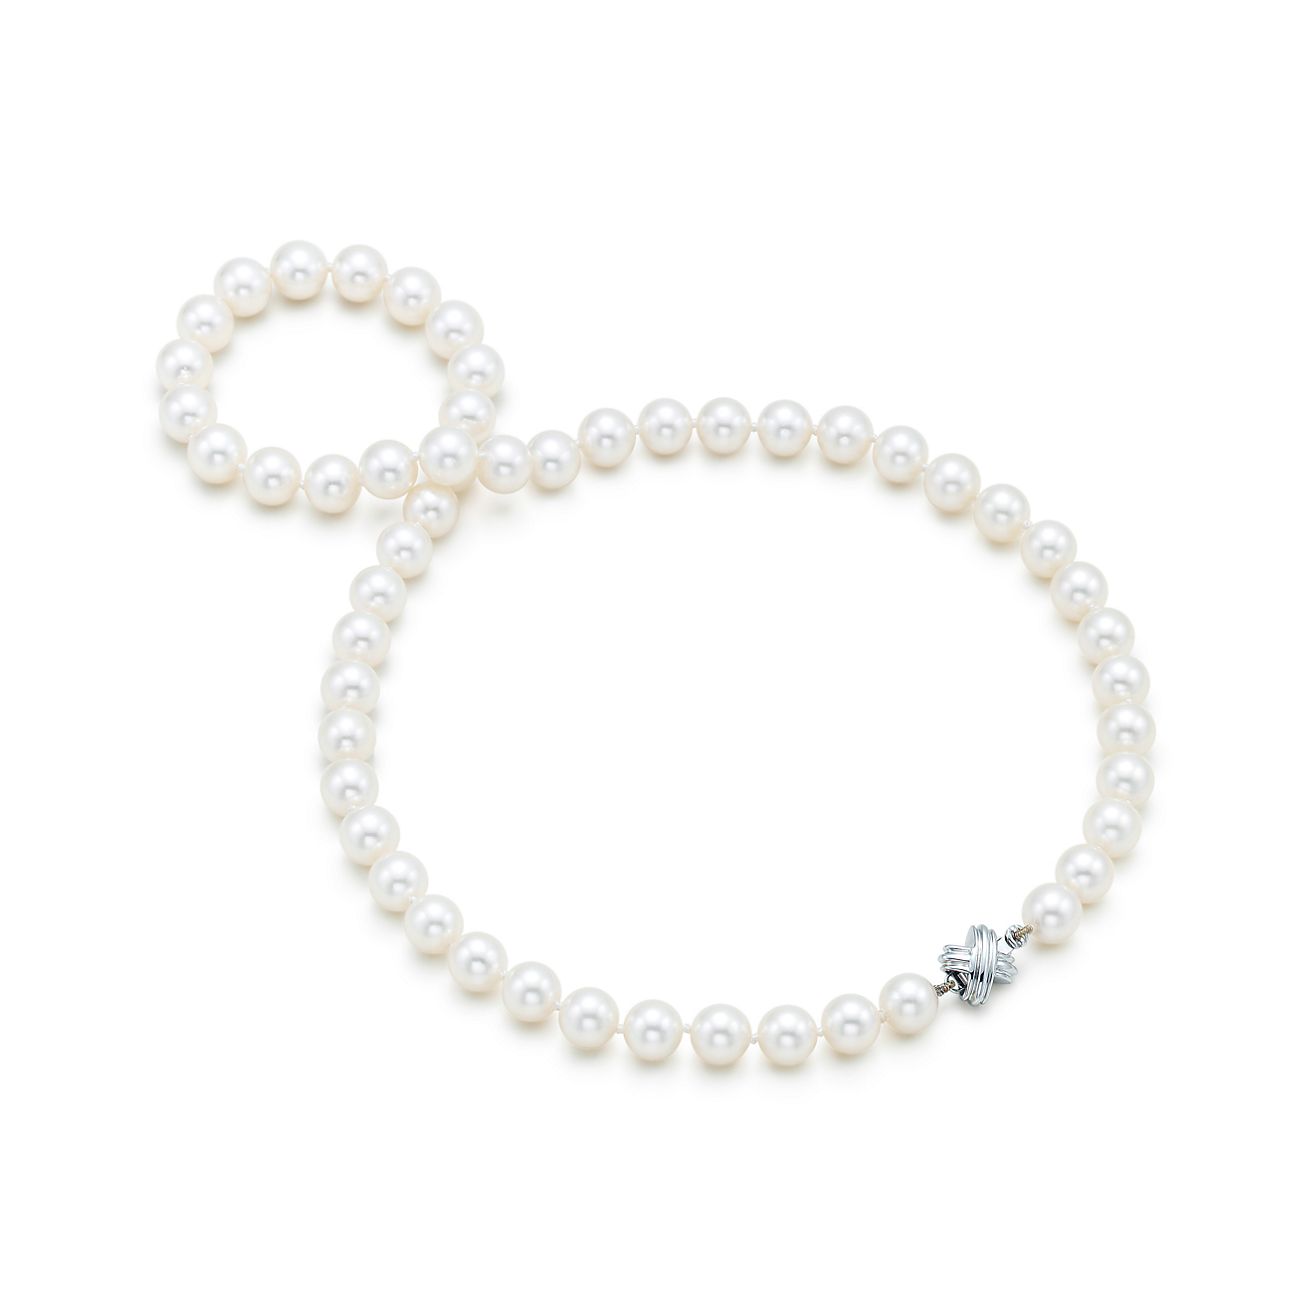 Tiffany Signature™ Pearls necklace of 